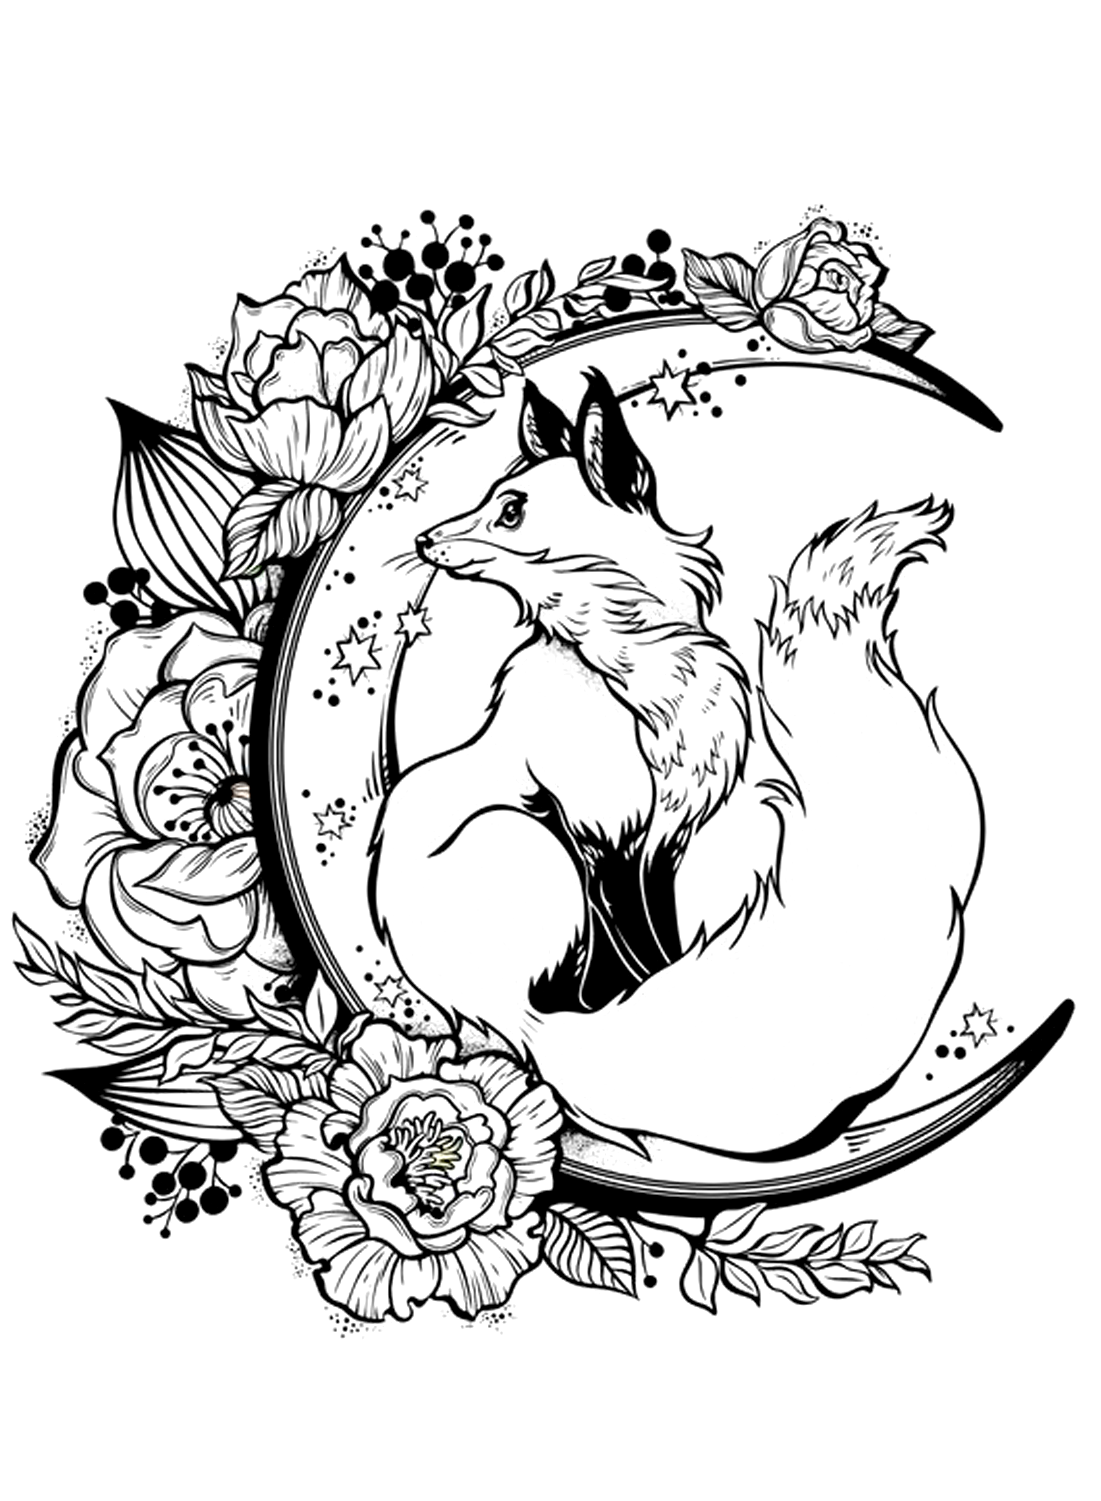 Fox and Flowers Coloring Sheet from Fox